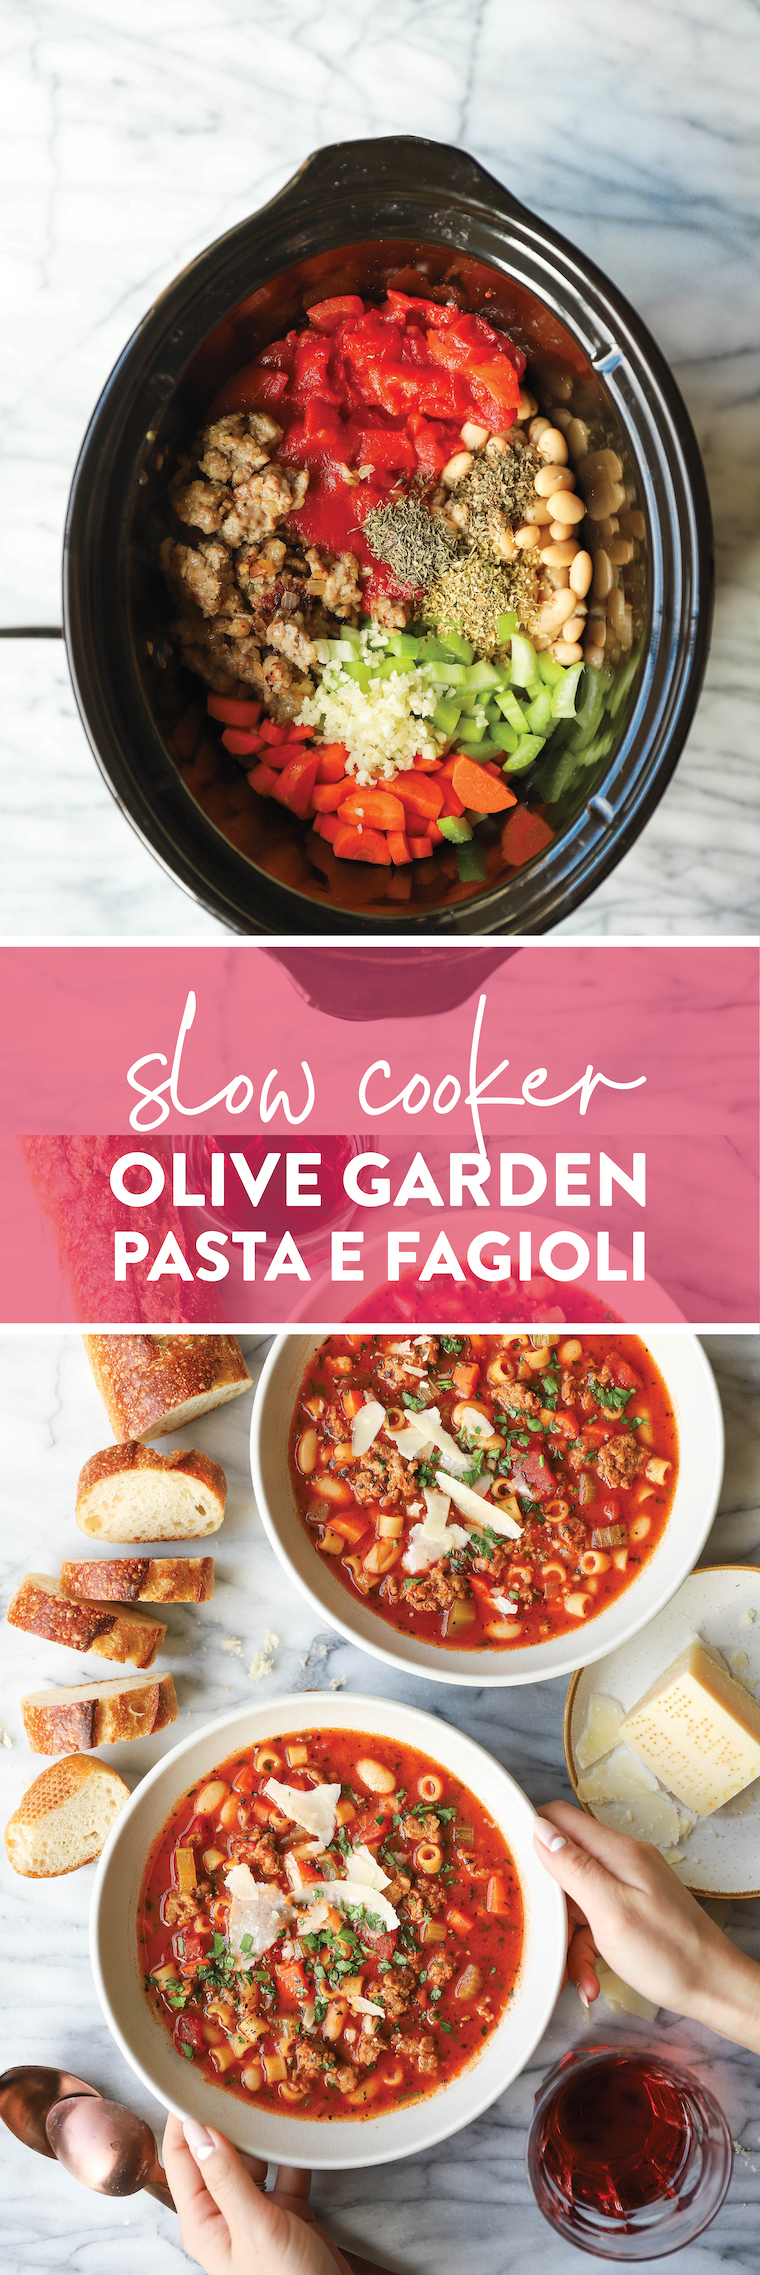 Slow Cooker Olive Garden Pasta e Fagioli - Everyone's FAVORITE Olive Garden soup made so easily in the crockpot! Just set it and forget it!